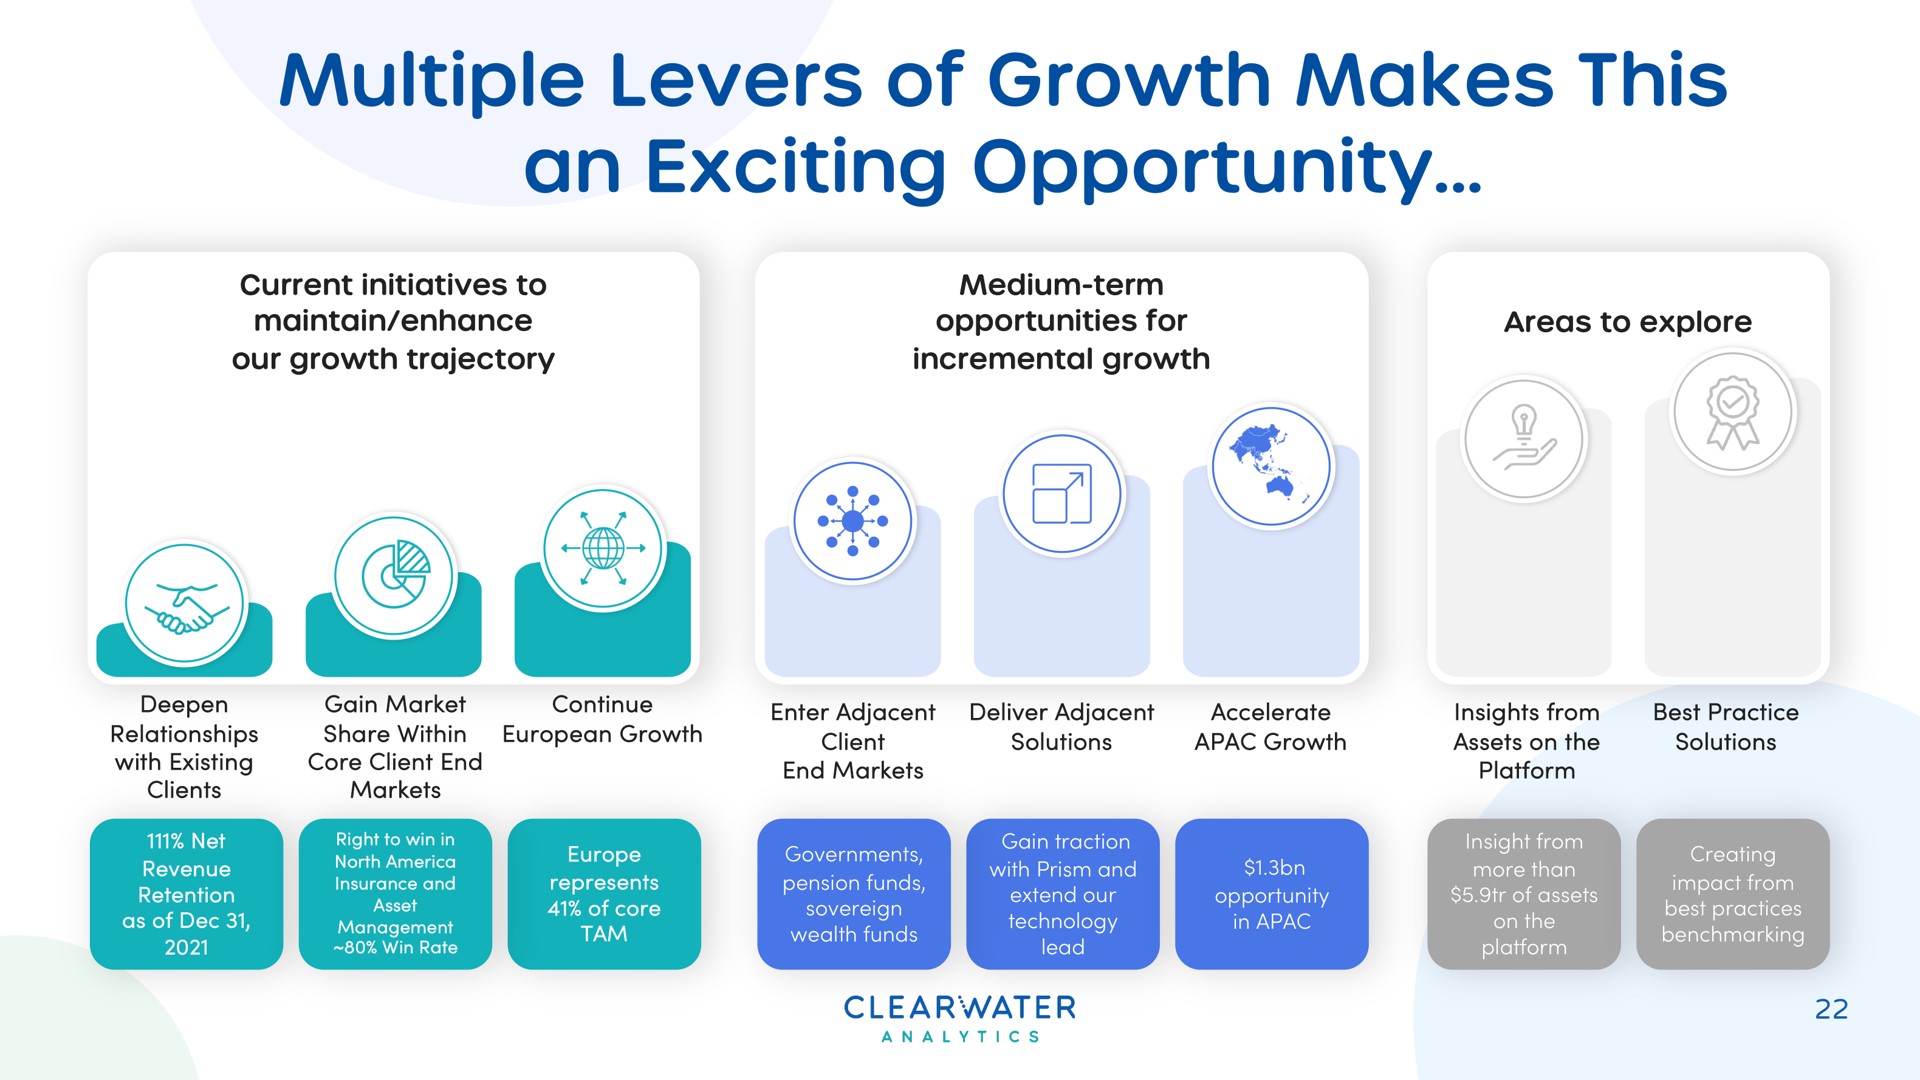 multiple levers of growth makes this an exciting opportunity | Clearwater Analytics